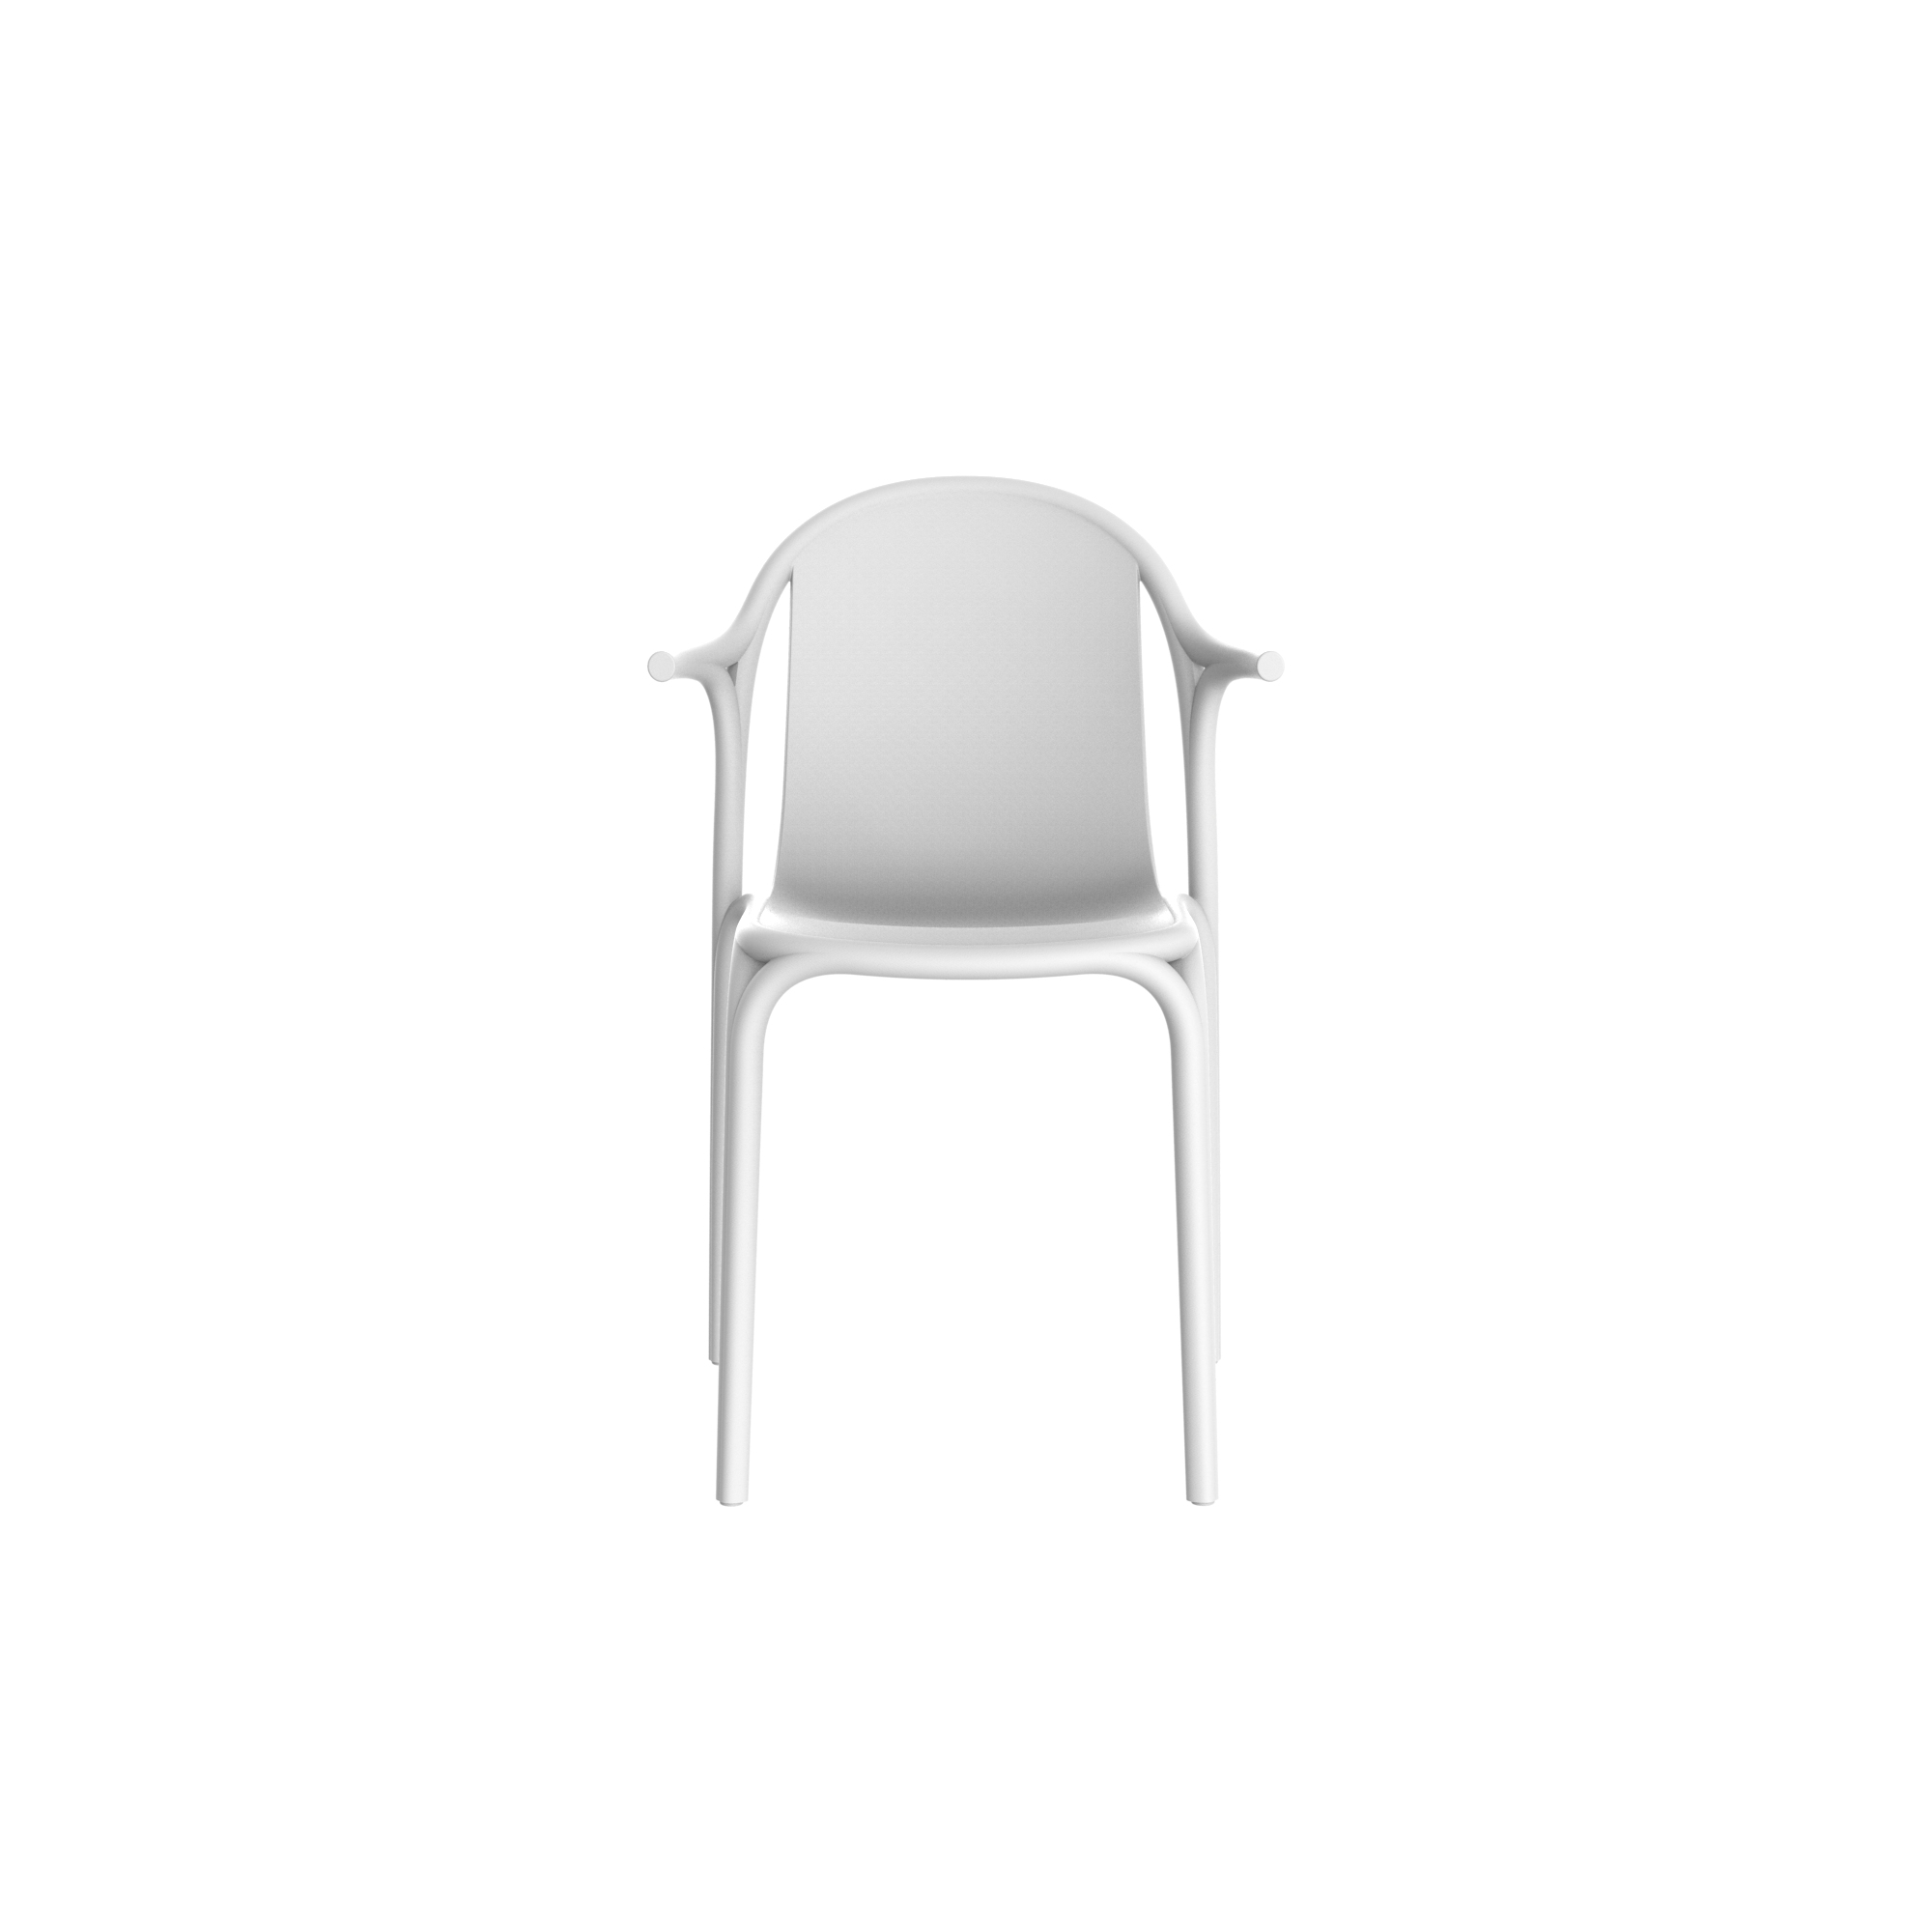 BROOKLYN CHAIR with armrests